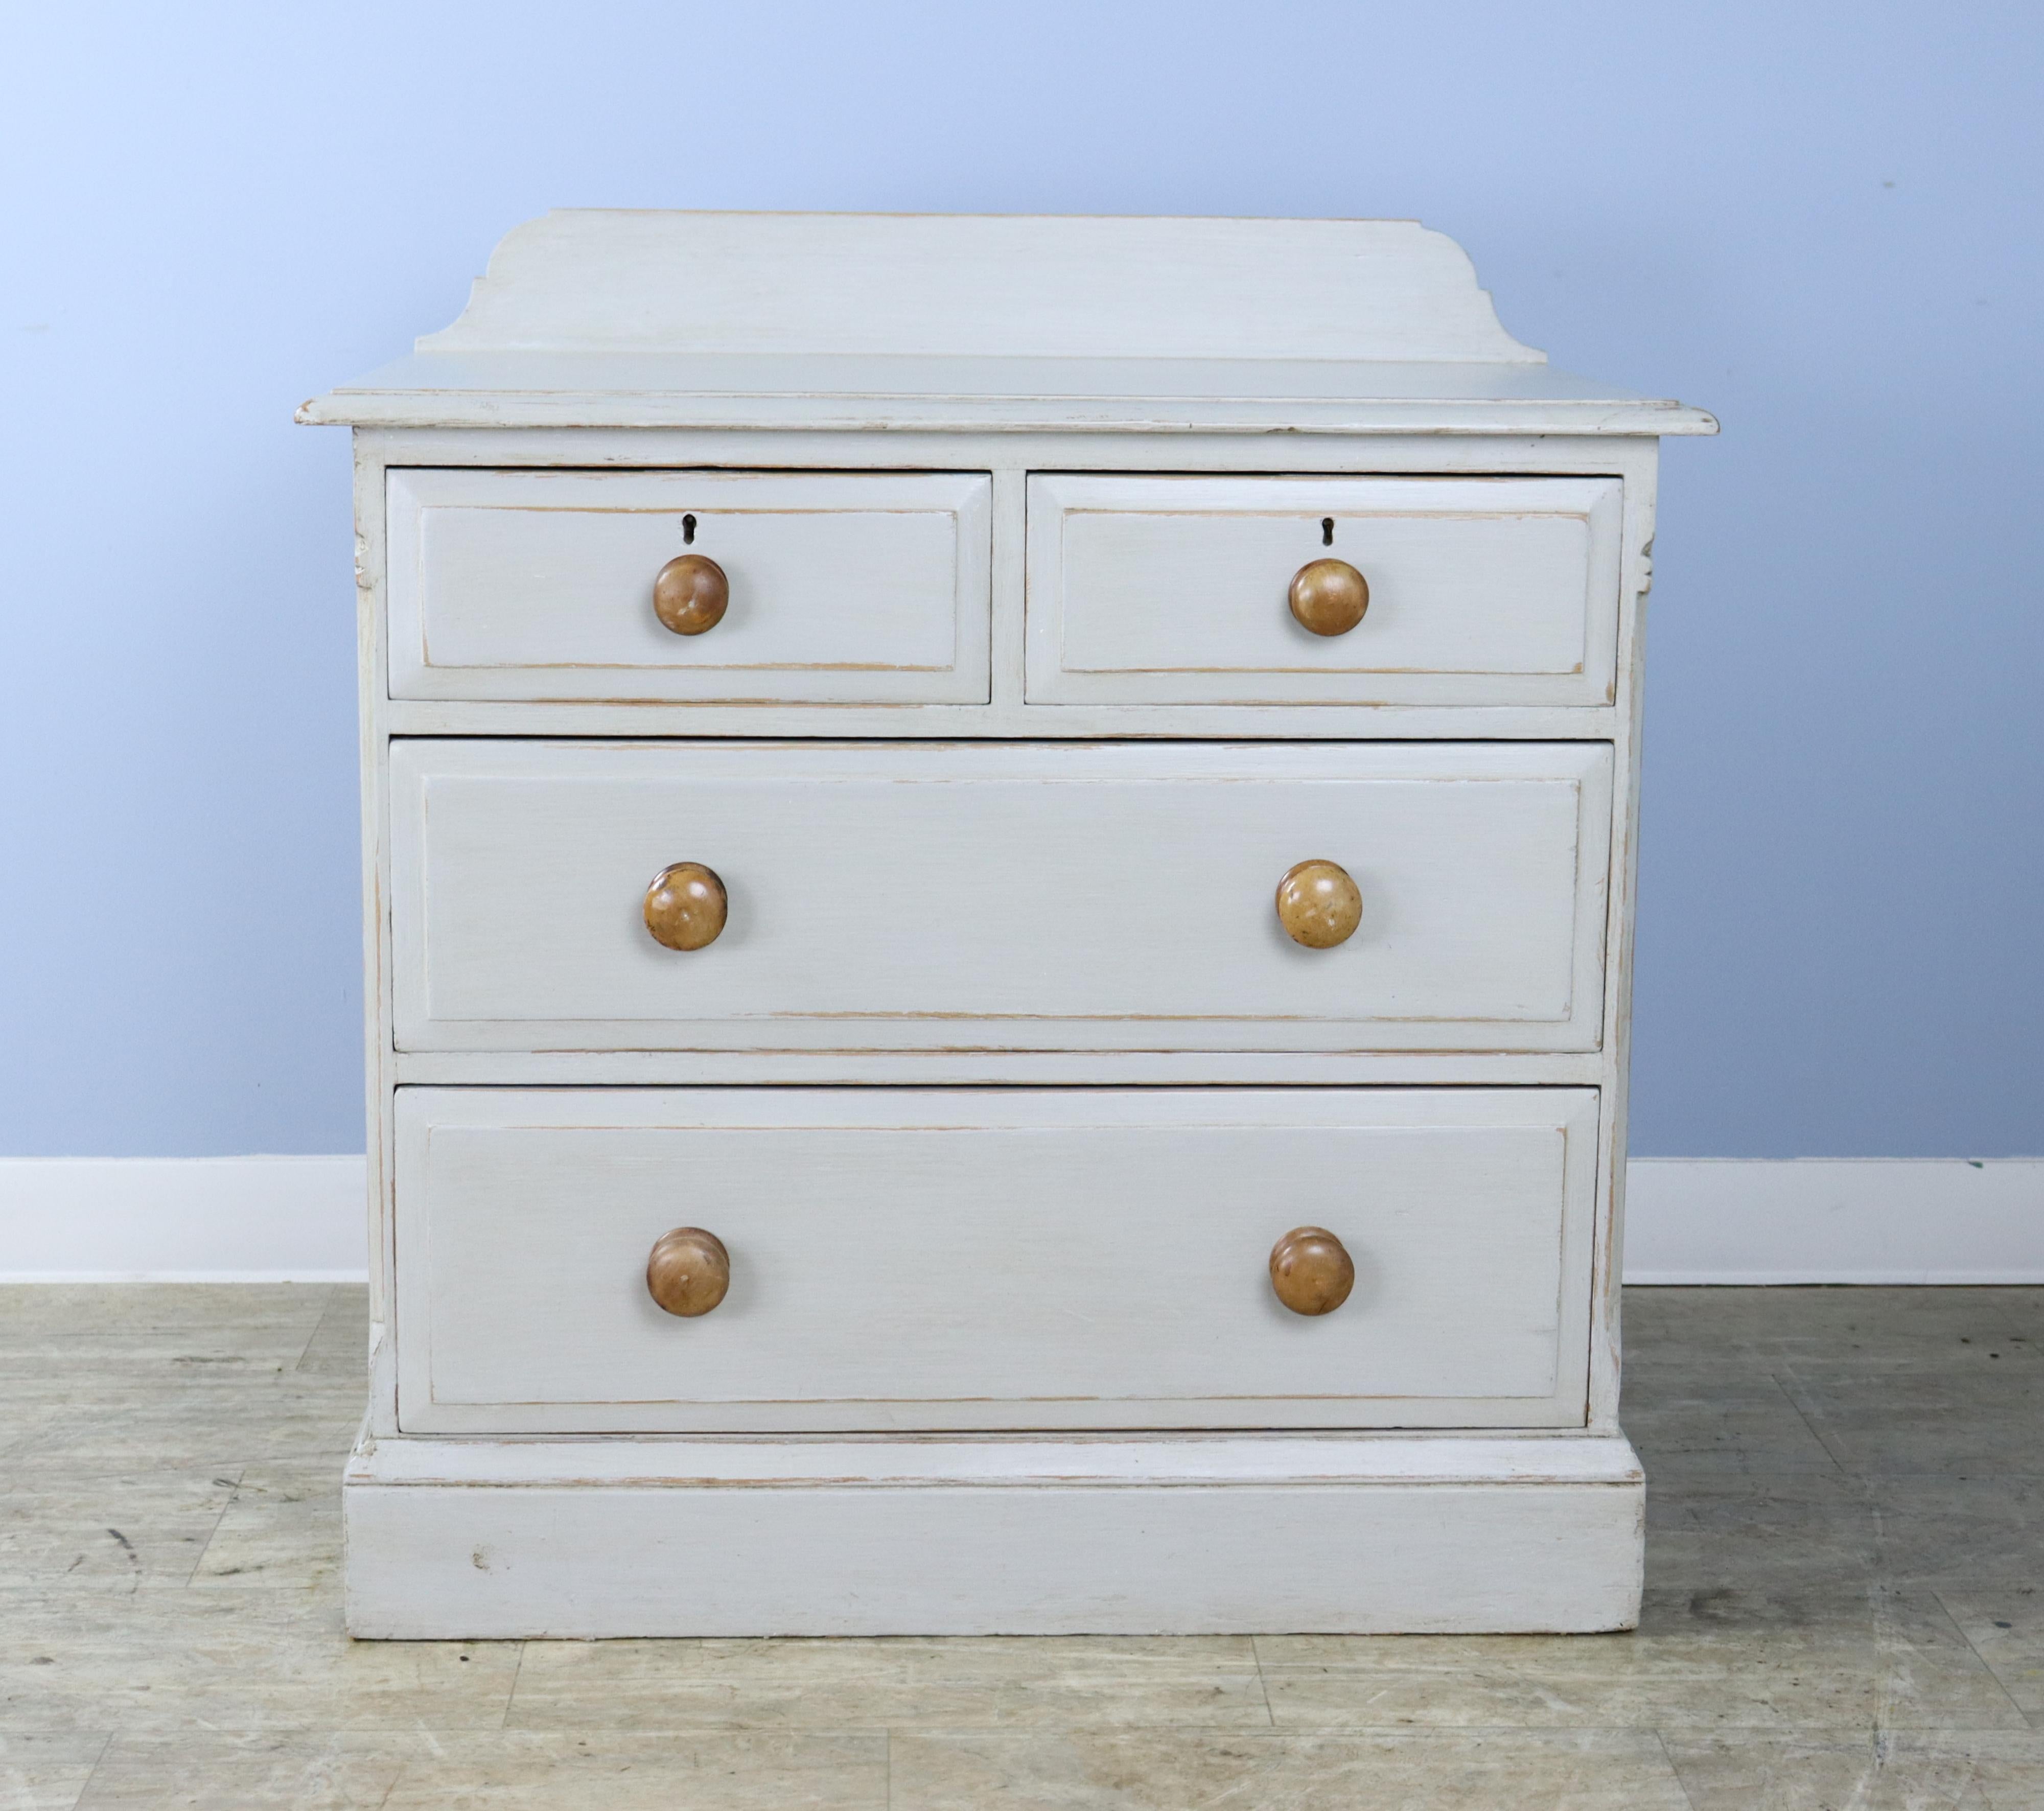 A small, charming chest of drawers with attractive knobs and refreshed gray paint. The height measurement below is for the height without the galleried back. The total height of the piece is 35 inches. The back of the piece is worn but sturdy.